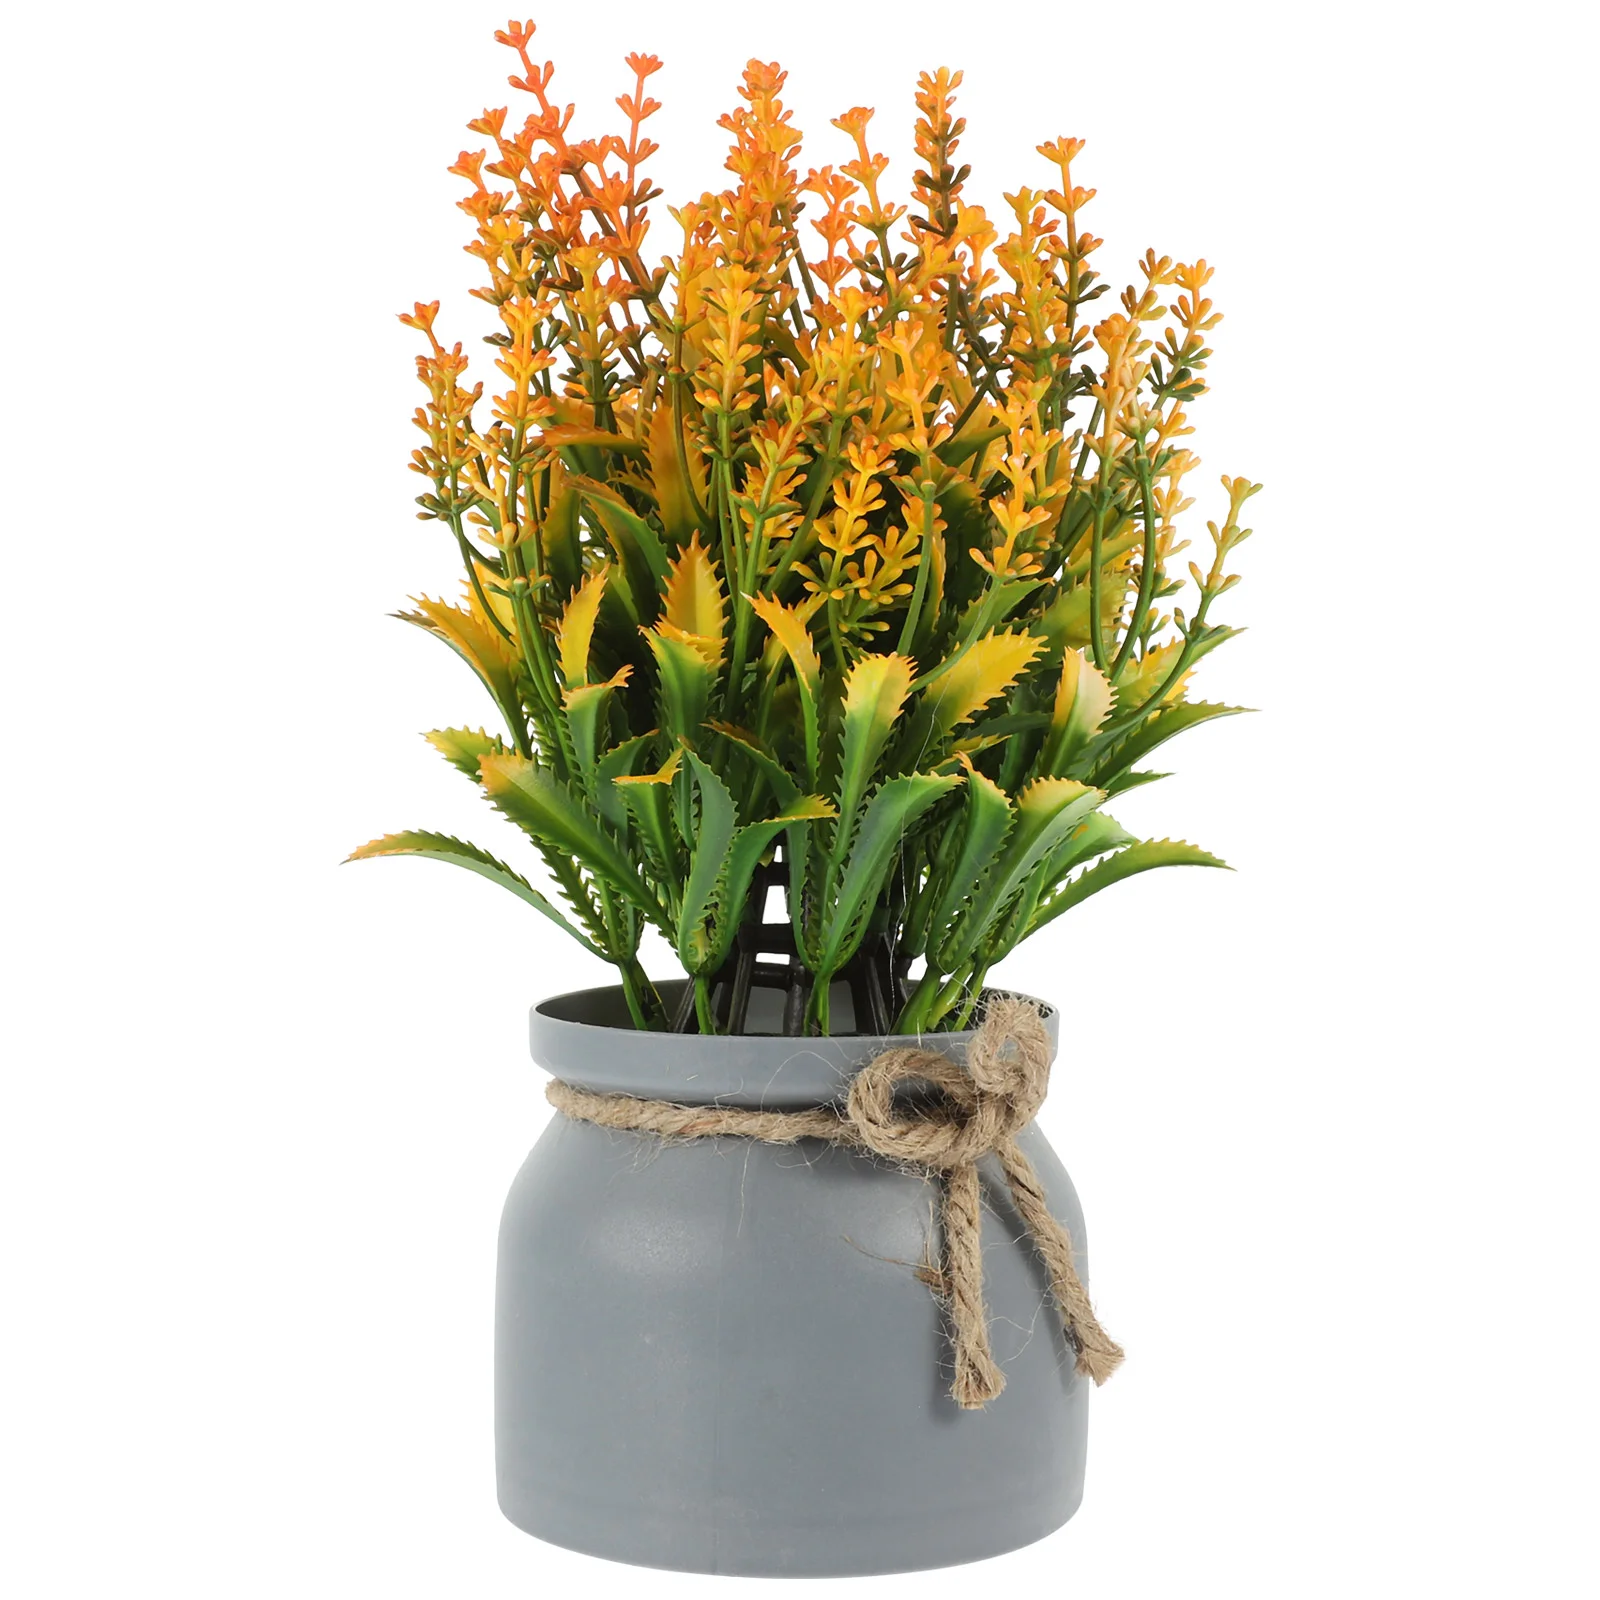 

Artificial Potted Plant Fake House Plants & Flowers in Decor Ornaments Vases Home